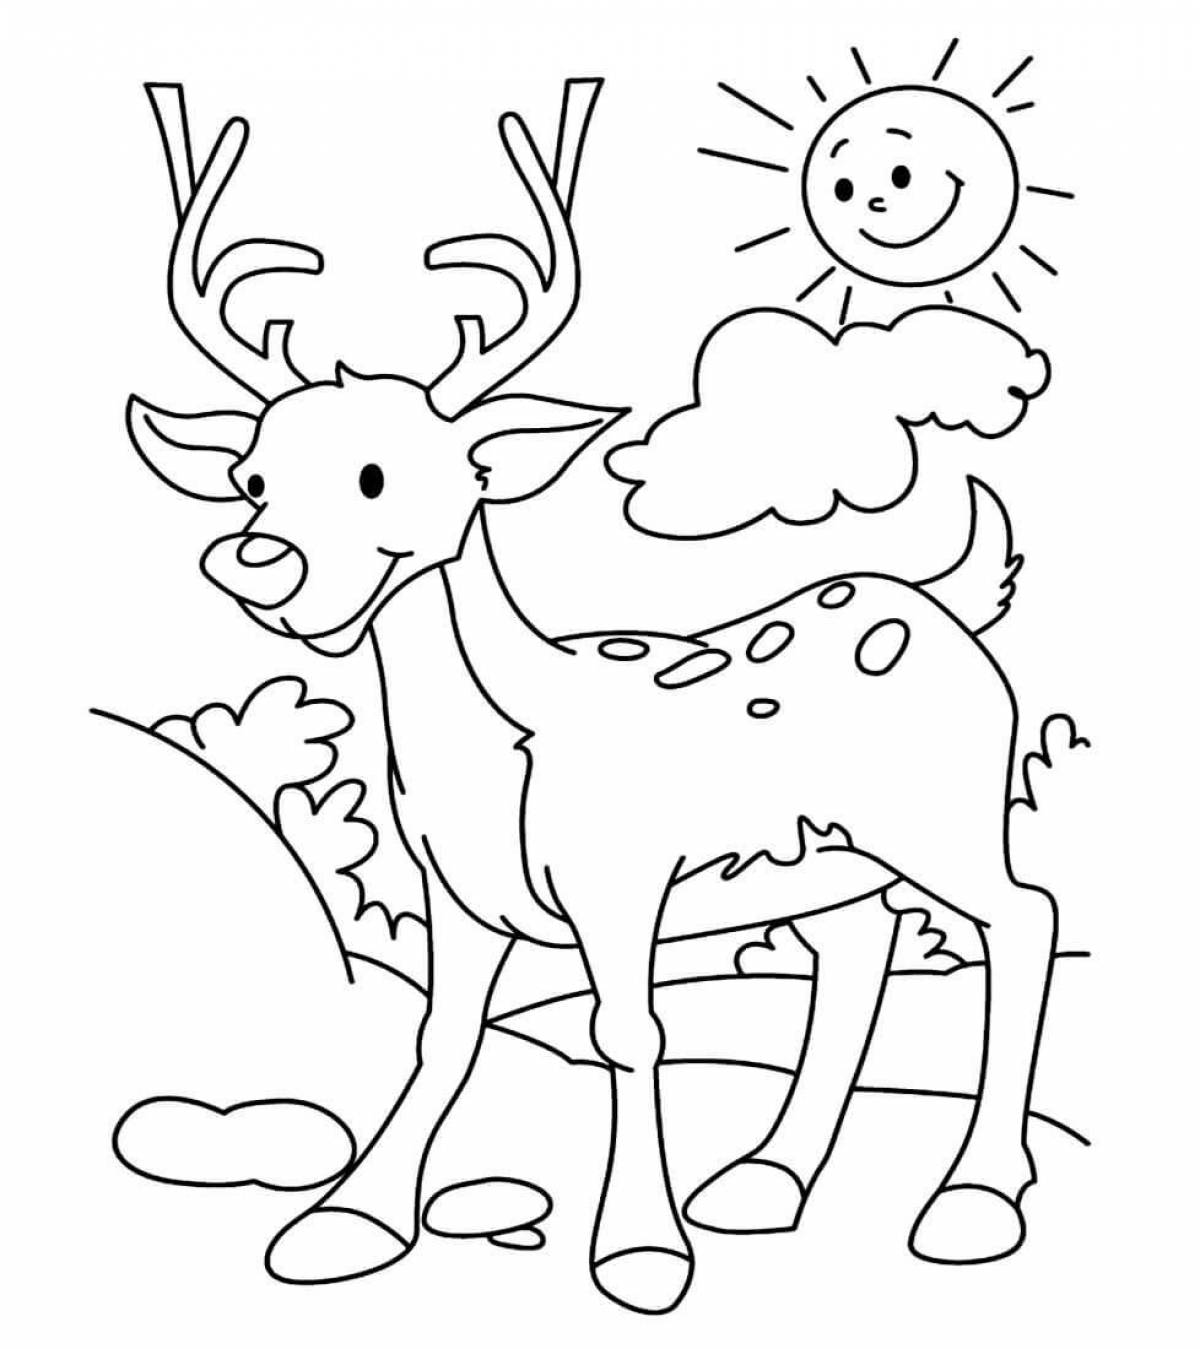 Amazing deer coloring page for kids